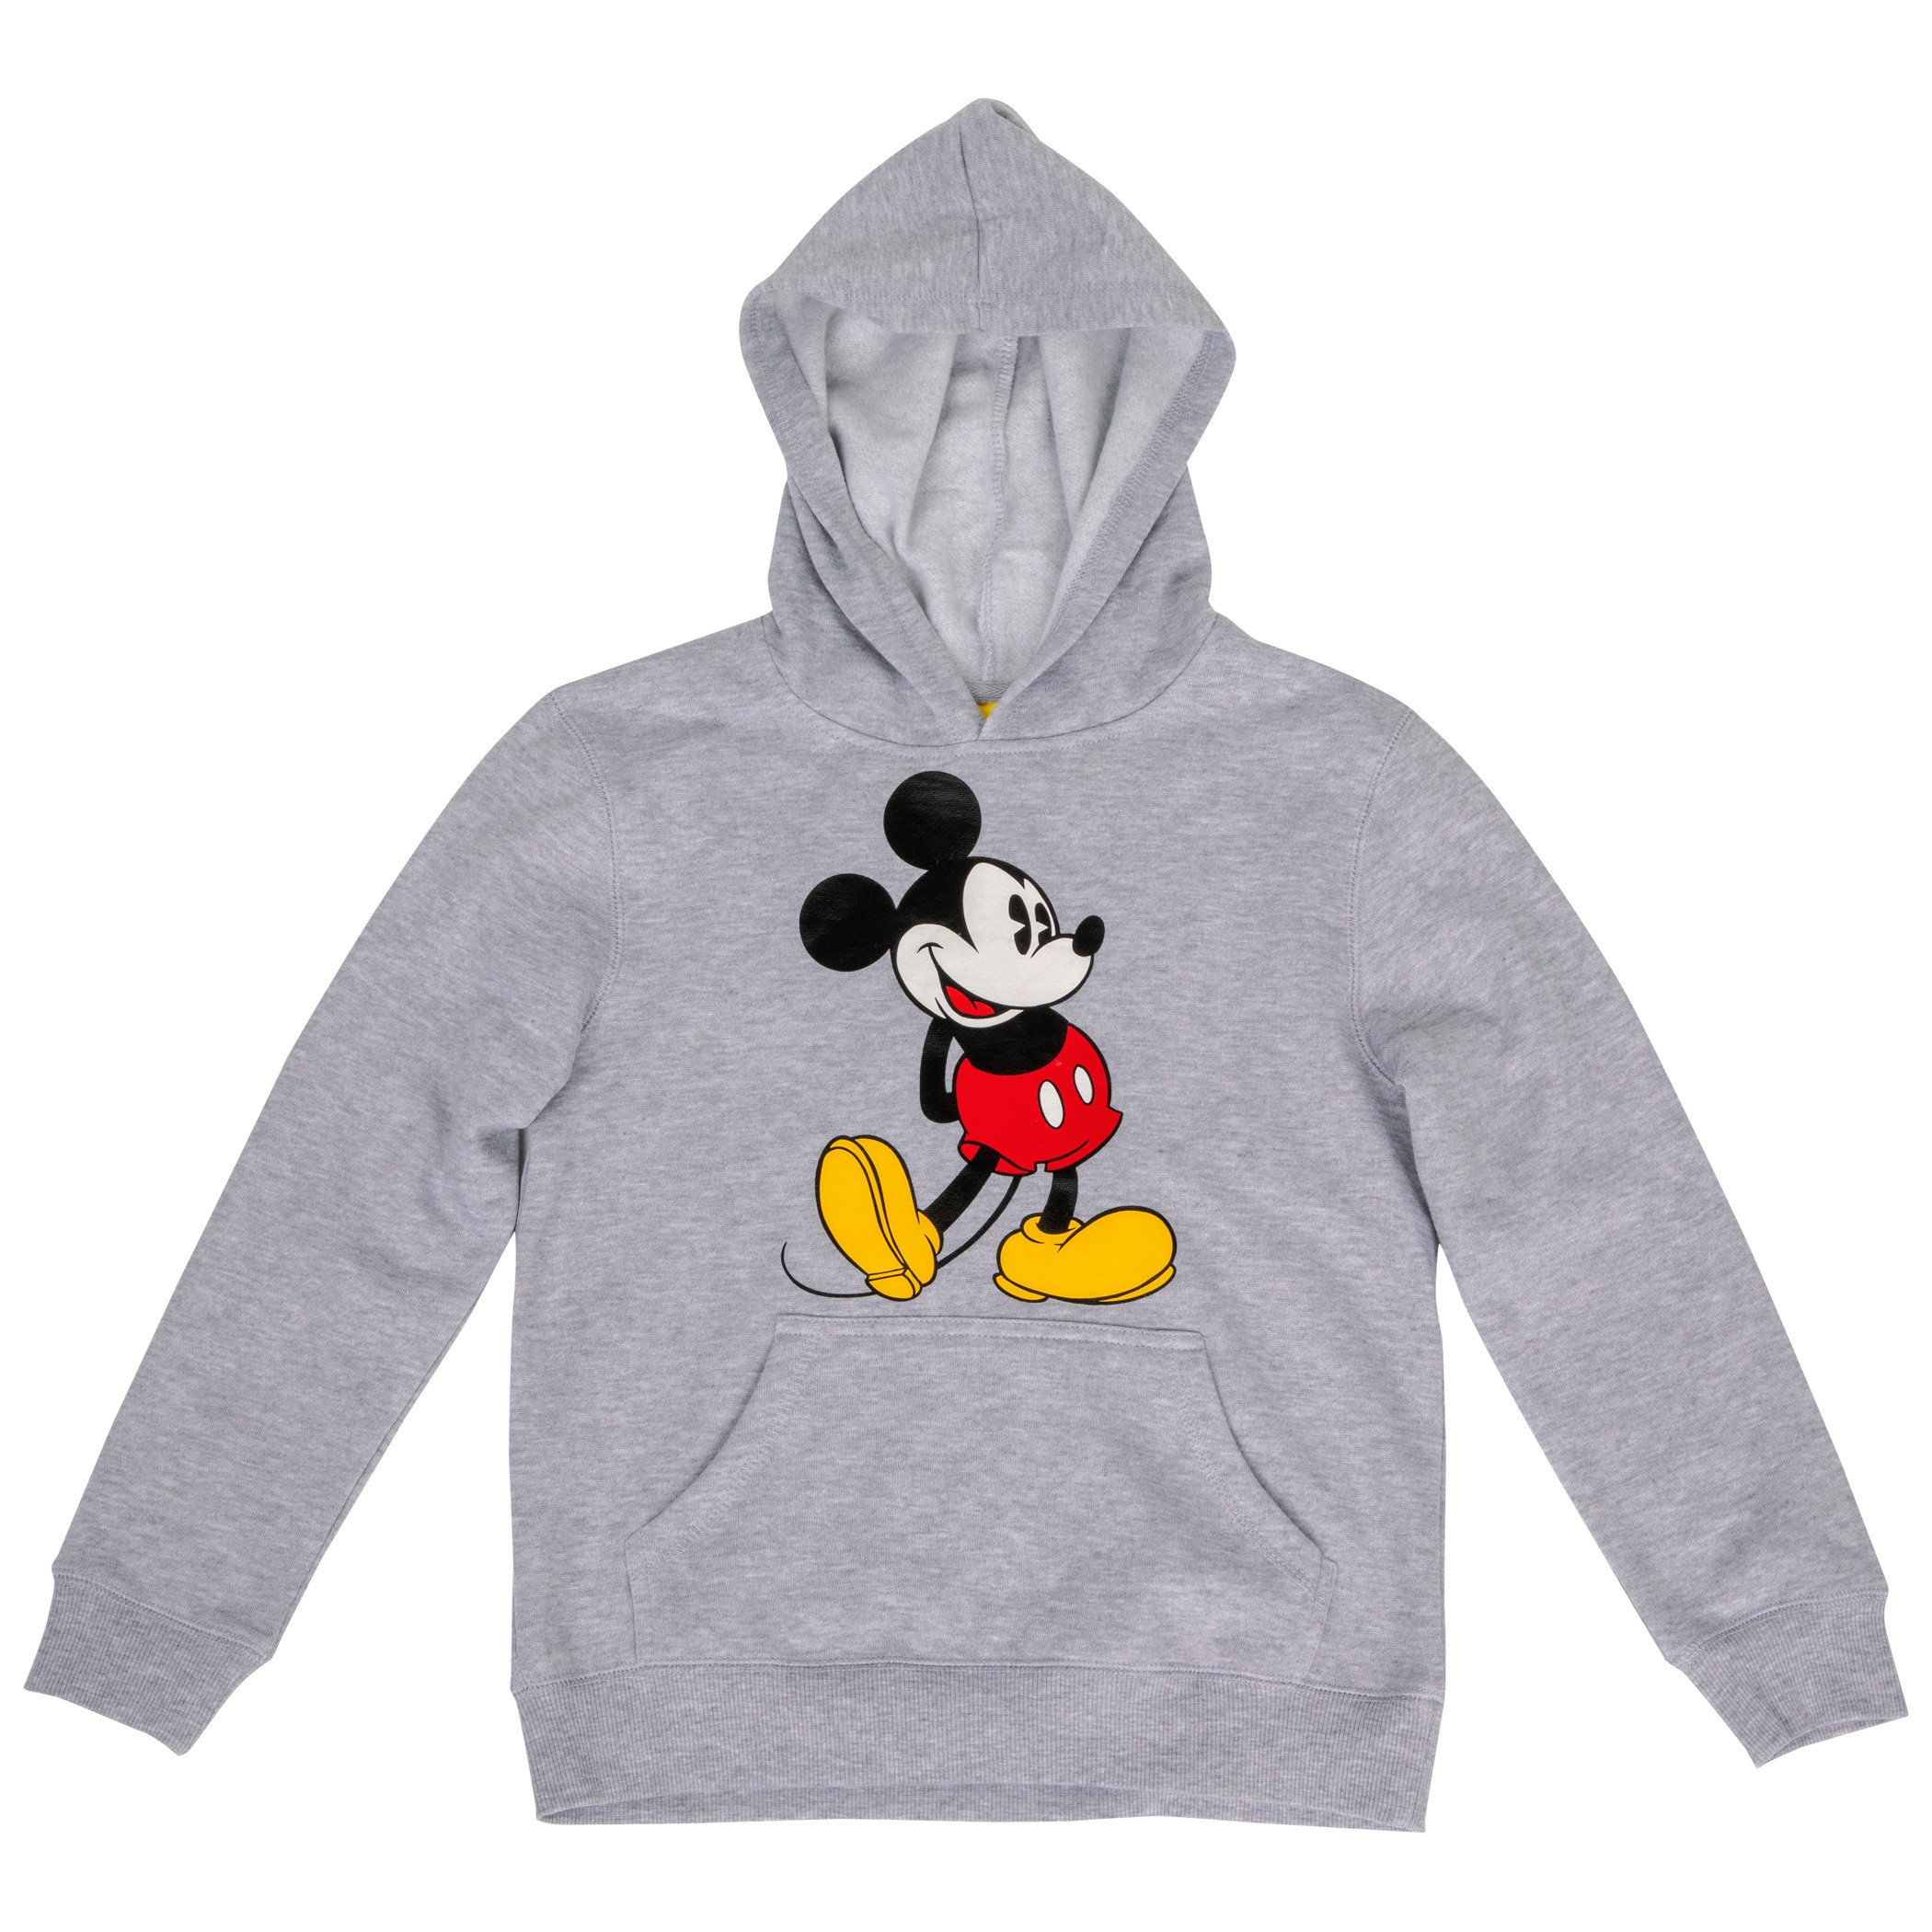 Disney's Mickey Mouse Character Boys Lightweight Hoodie